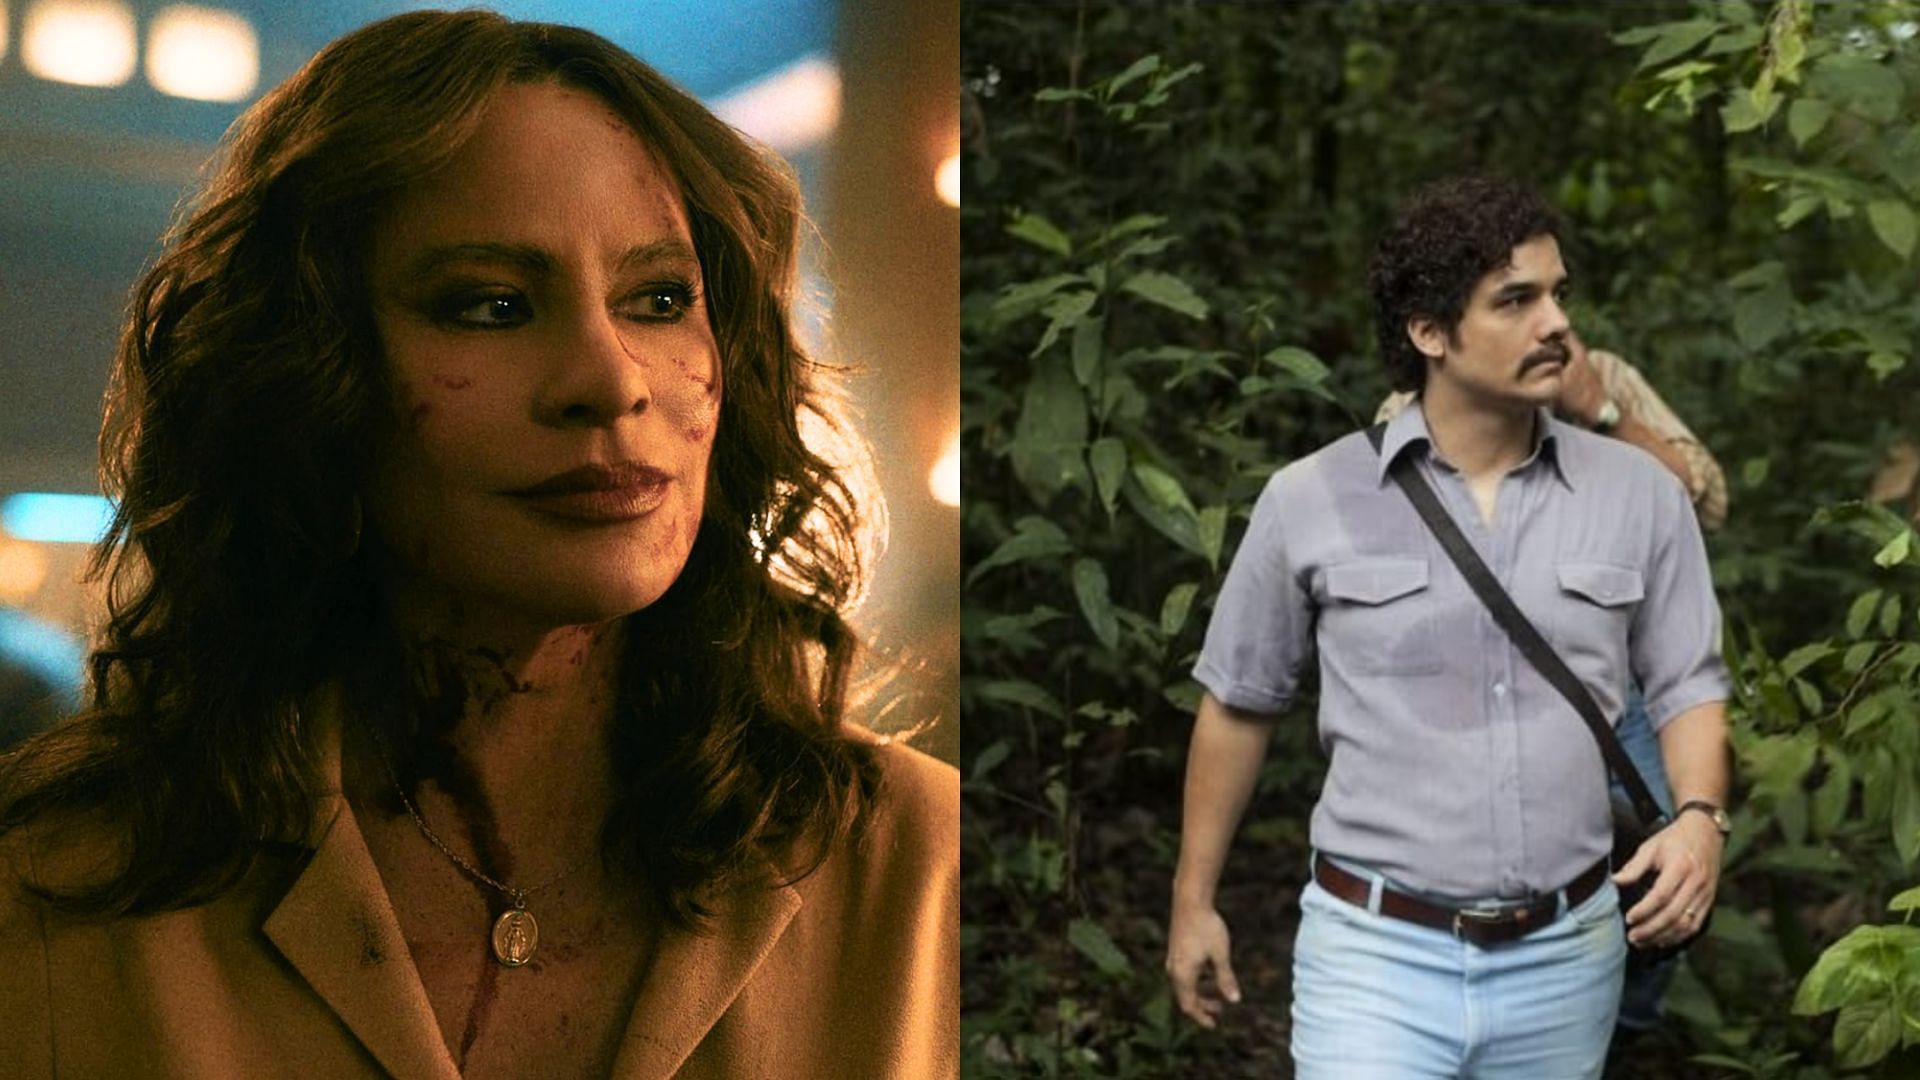 Griselda and Narcos share some common cast and crew (Images via Netflix)